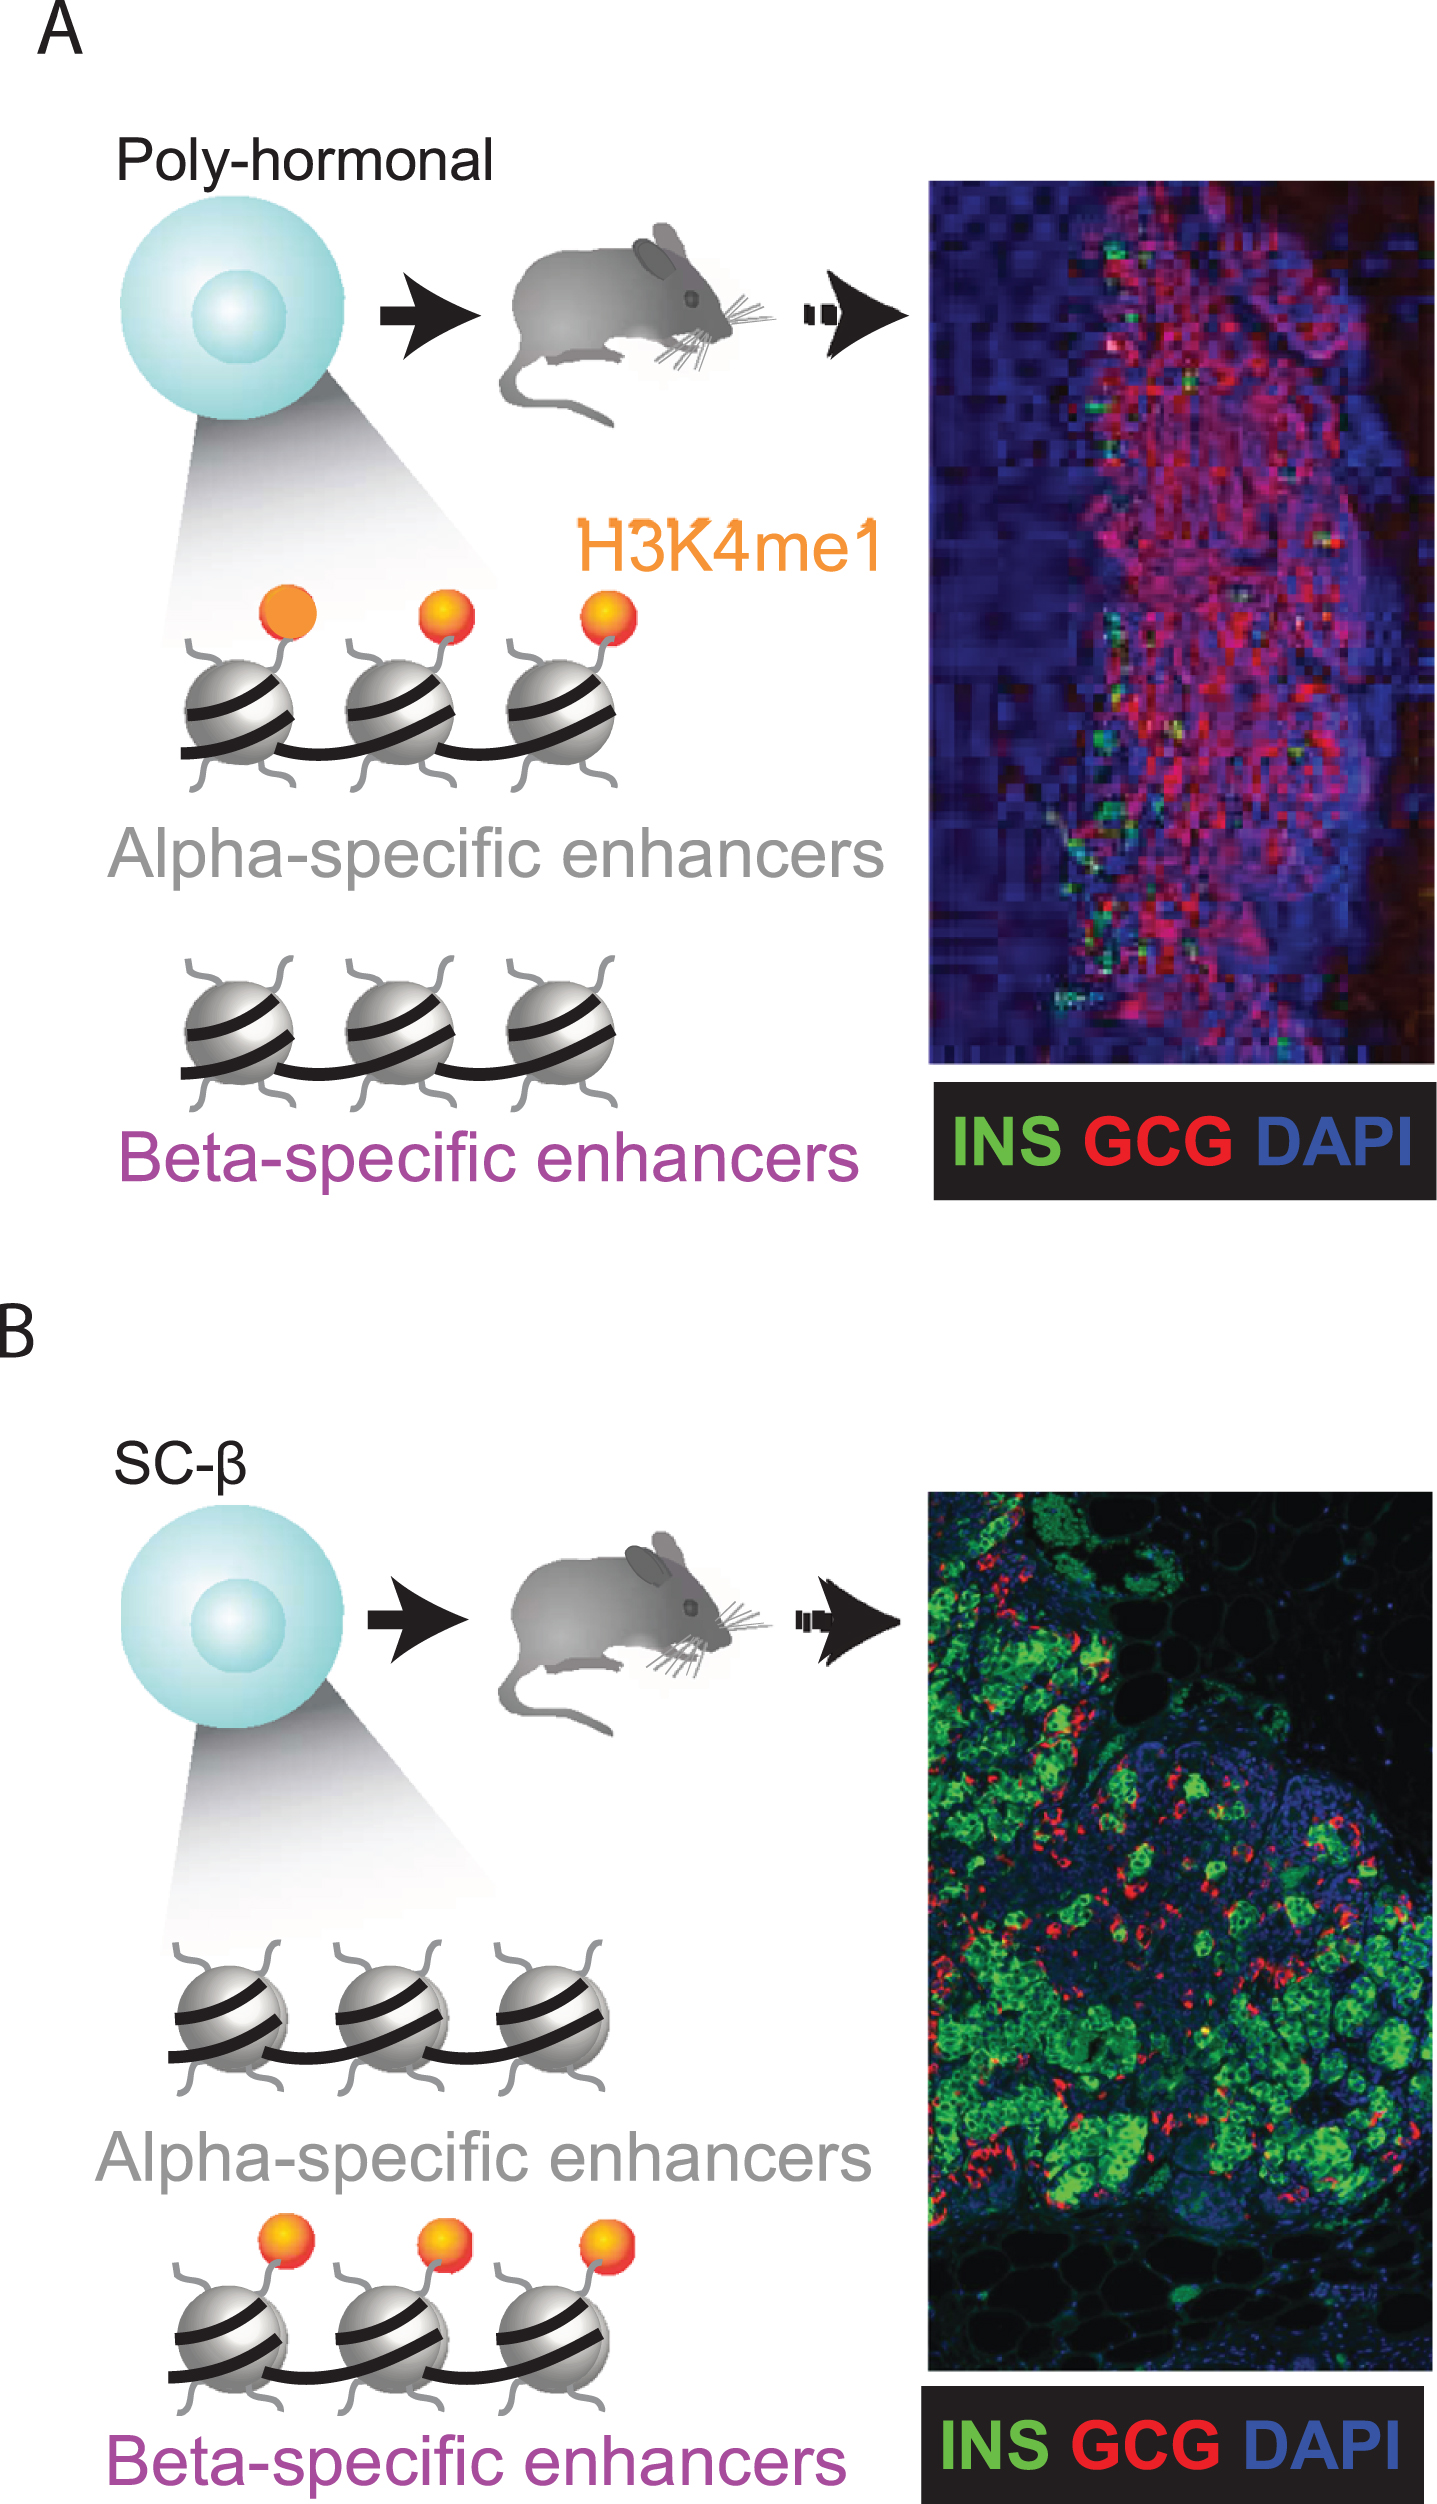 Epigenetic priming predicts lineage potential. (A-B) The competence to execute specific cell fates can be linked to a gain of H3K4me1 before H3K27ac deposition at lineage-specific enhancers (9). We find that α-specific enhancers are selectively H3K4me1-marked in PH cells (A). Following transplantation under the kidney capsule of immunocompromised mice, PH indeed resolve toward α cells, as evidenced by graft staining for insulin (green)/glucagon (red). SC-β cells (B) show the opposite trend, as expected. Thus, epigenetic priming steers PH toward an α cell fate.